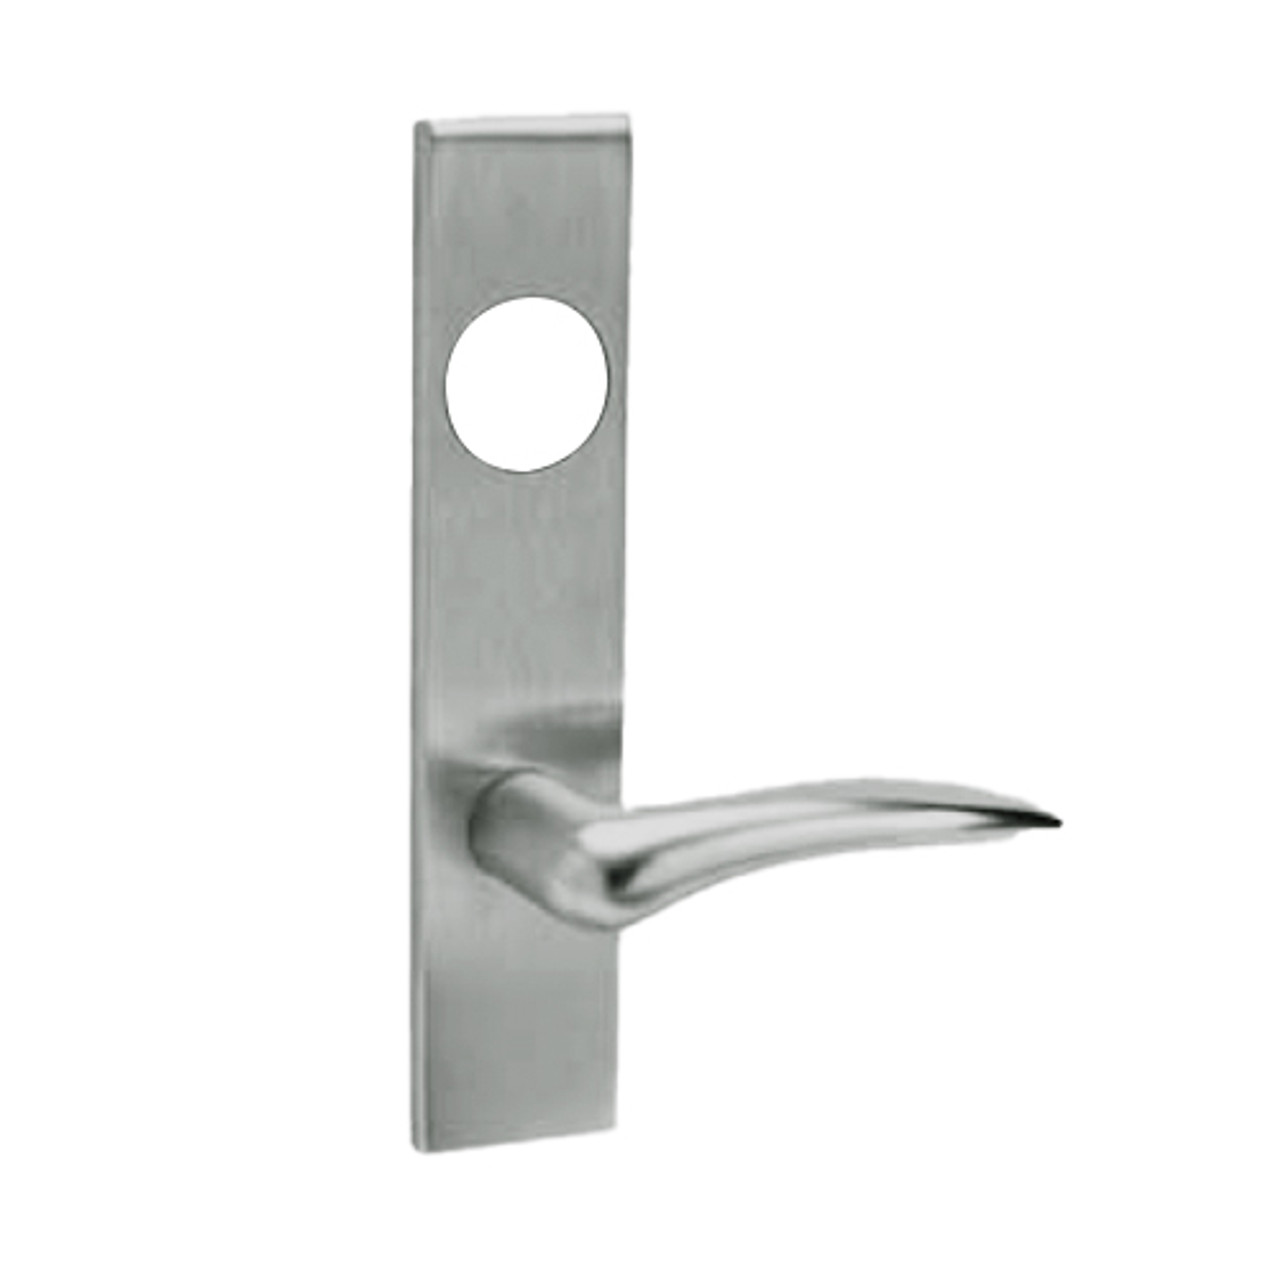 ML2073-DSR-619-LH Corbin Russwin ML2000 Series Mortise Classroom Security Locksets with Dirke Lever and Deadbolt in Satin Nickel